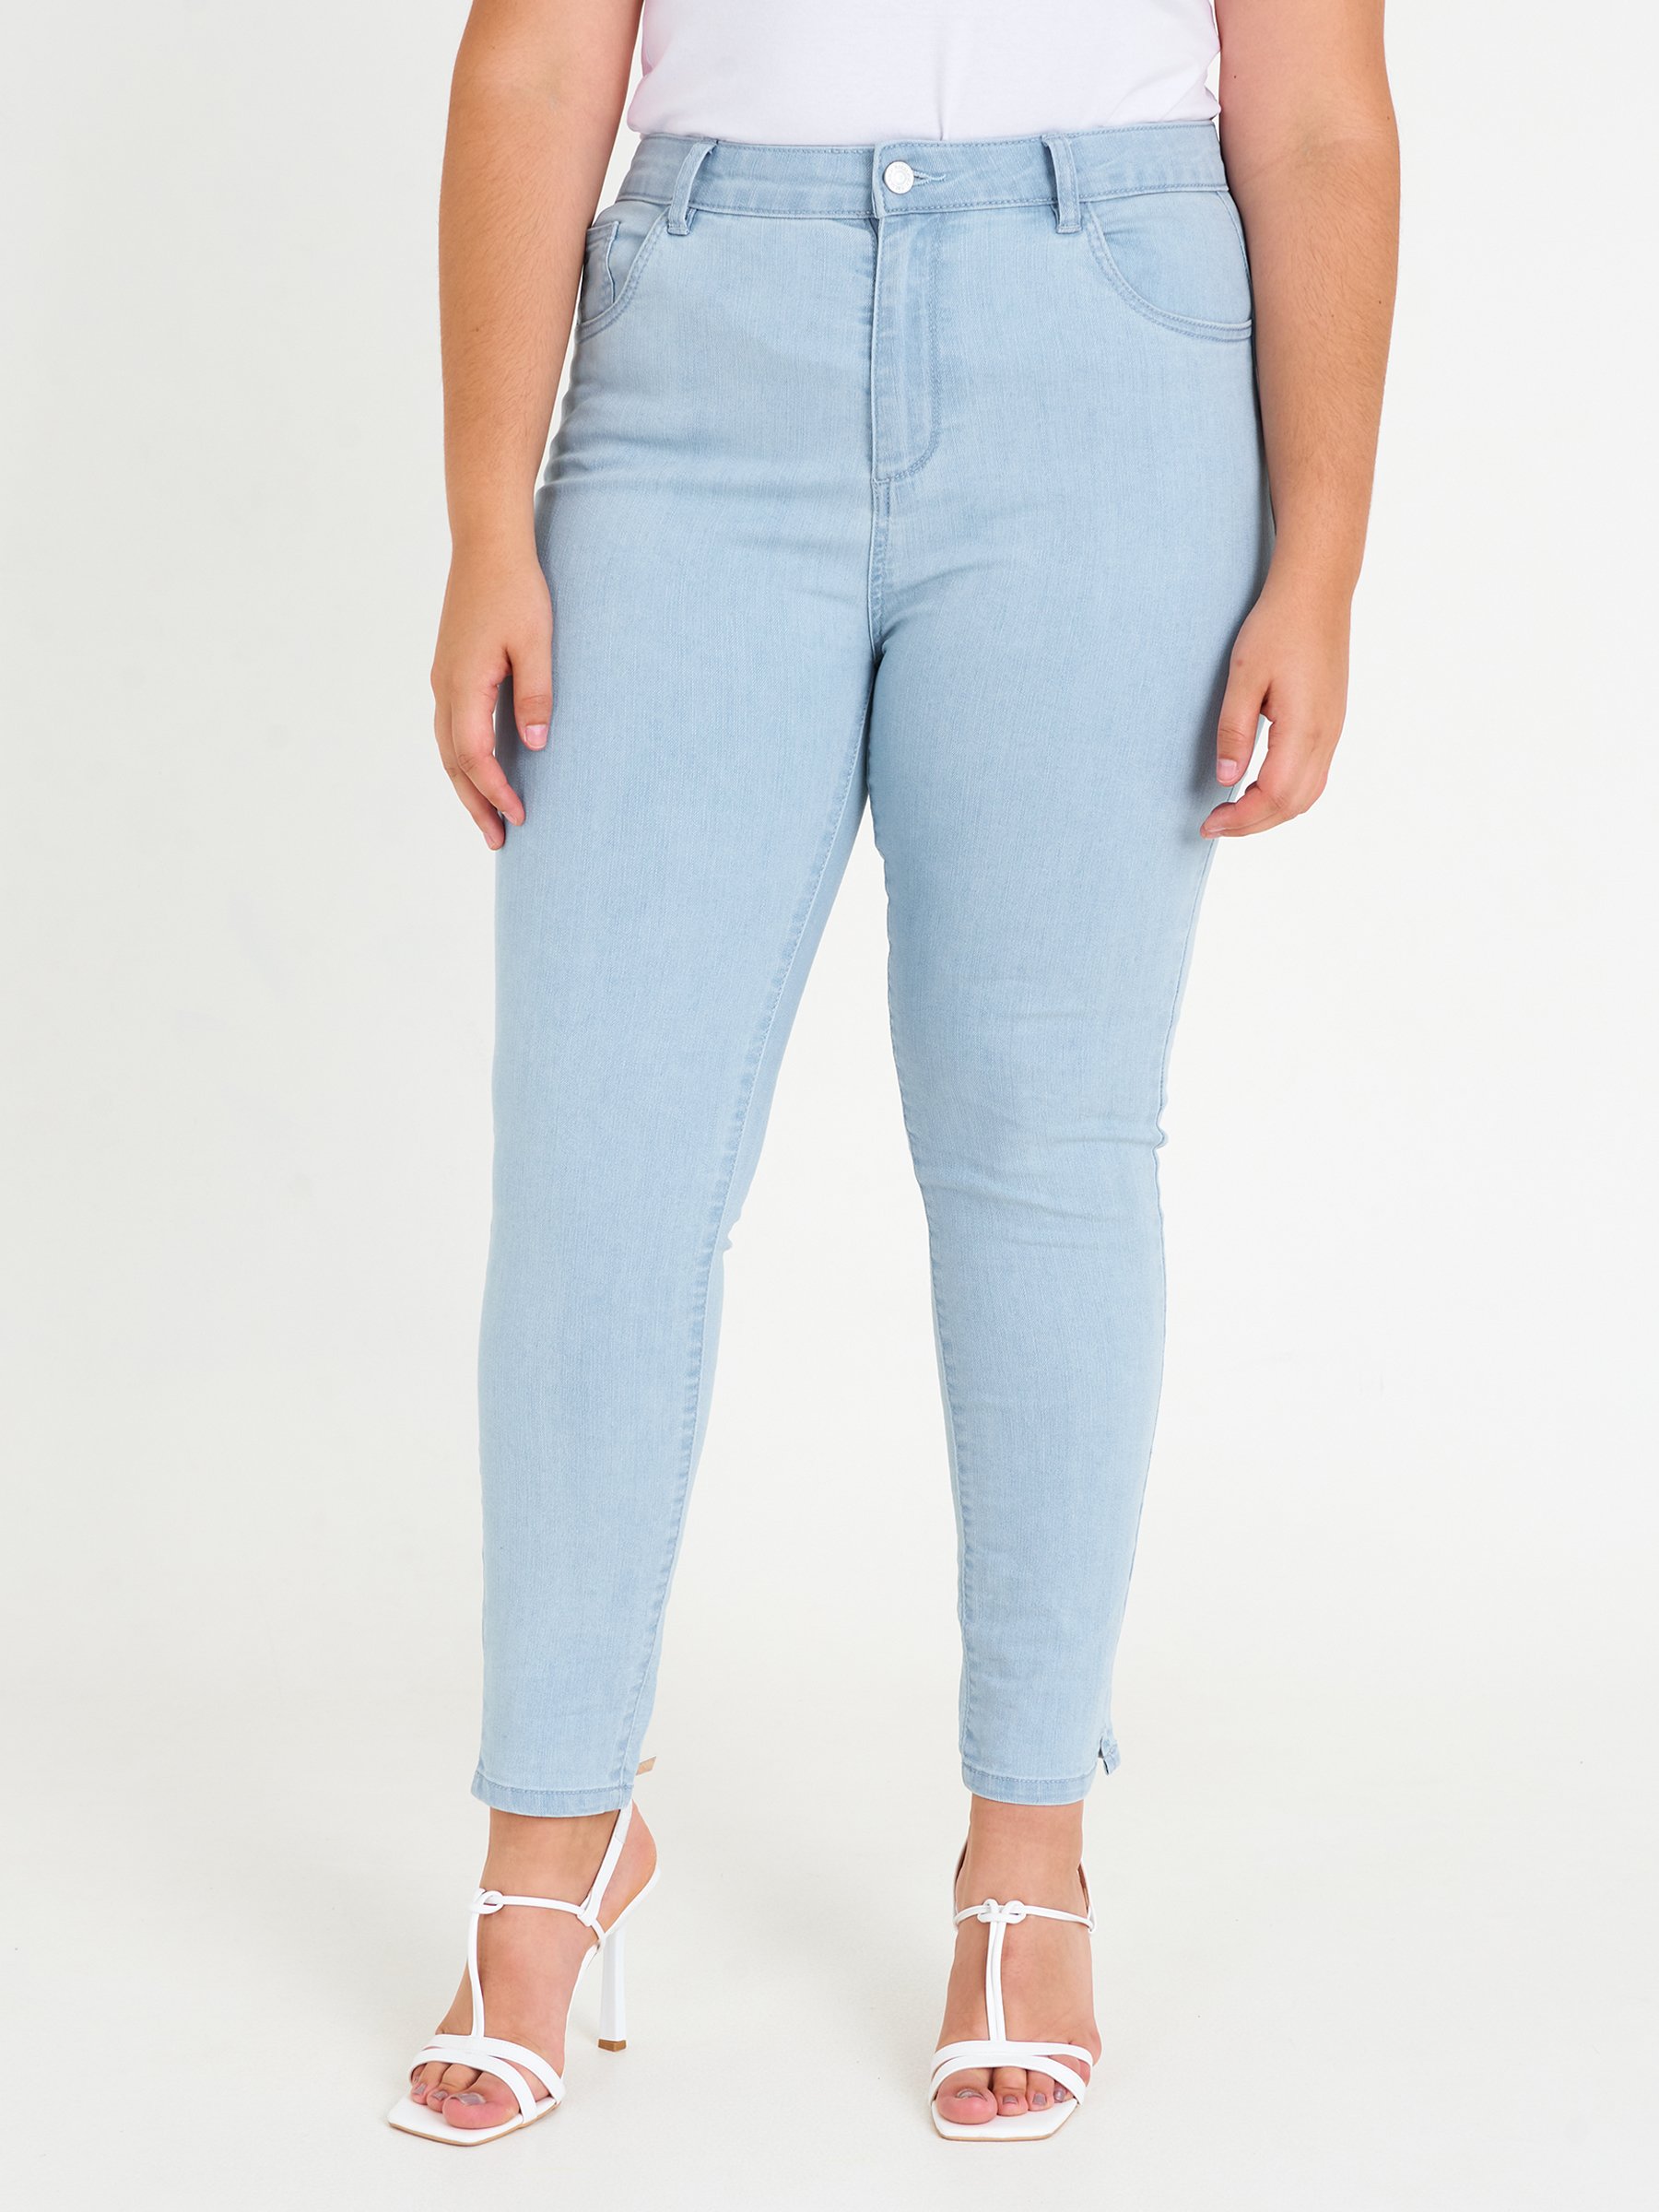 Women's Plus size High Waisted Skinny Jeans, Light Blue